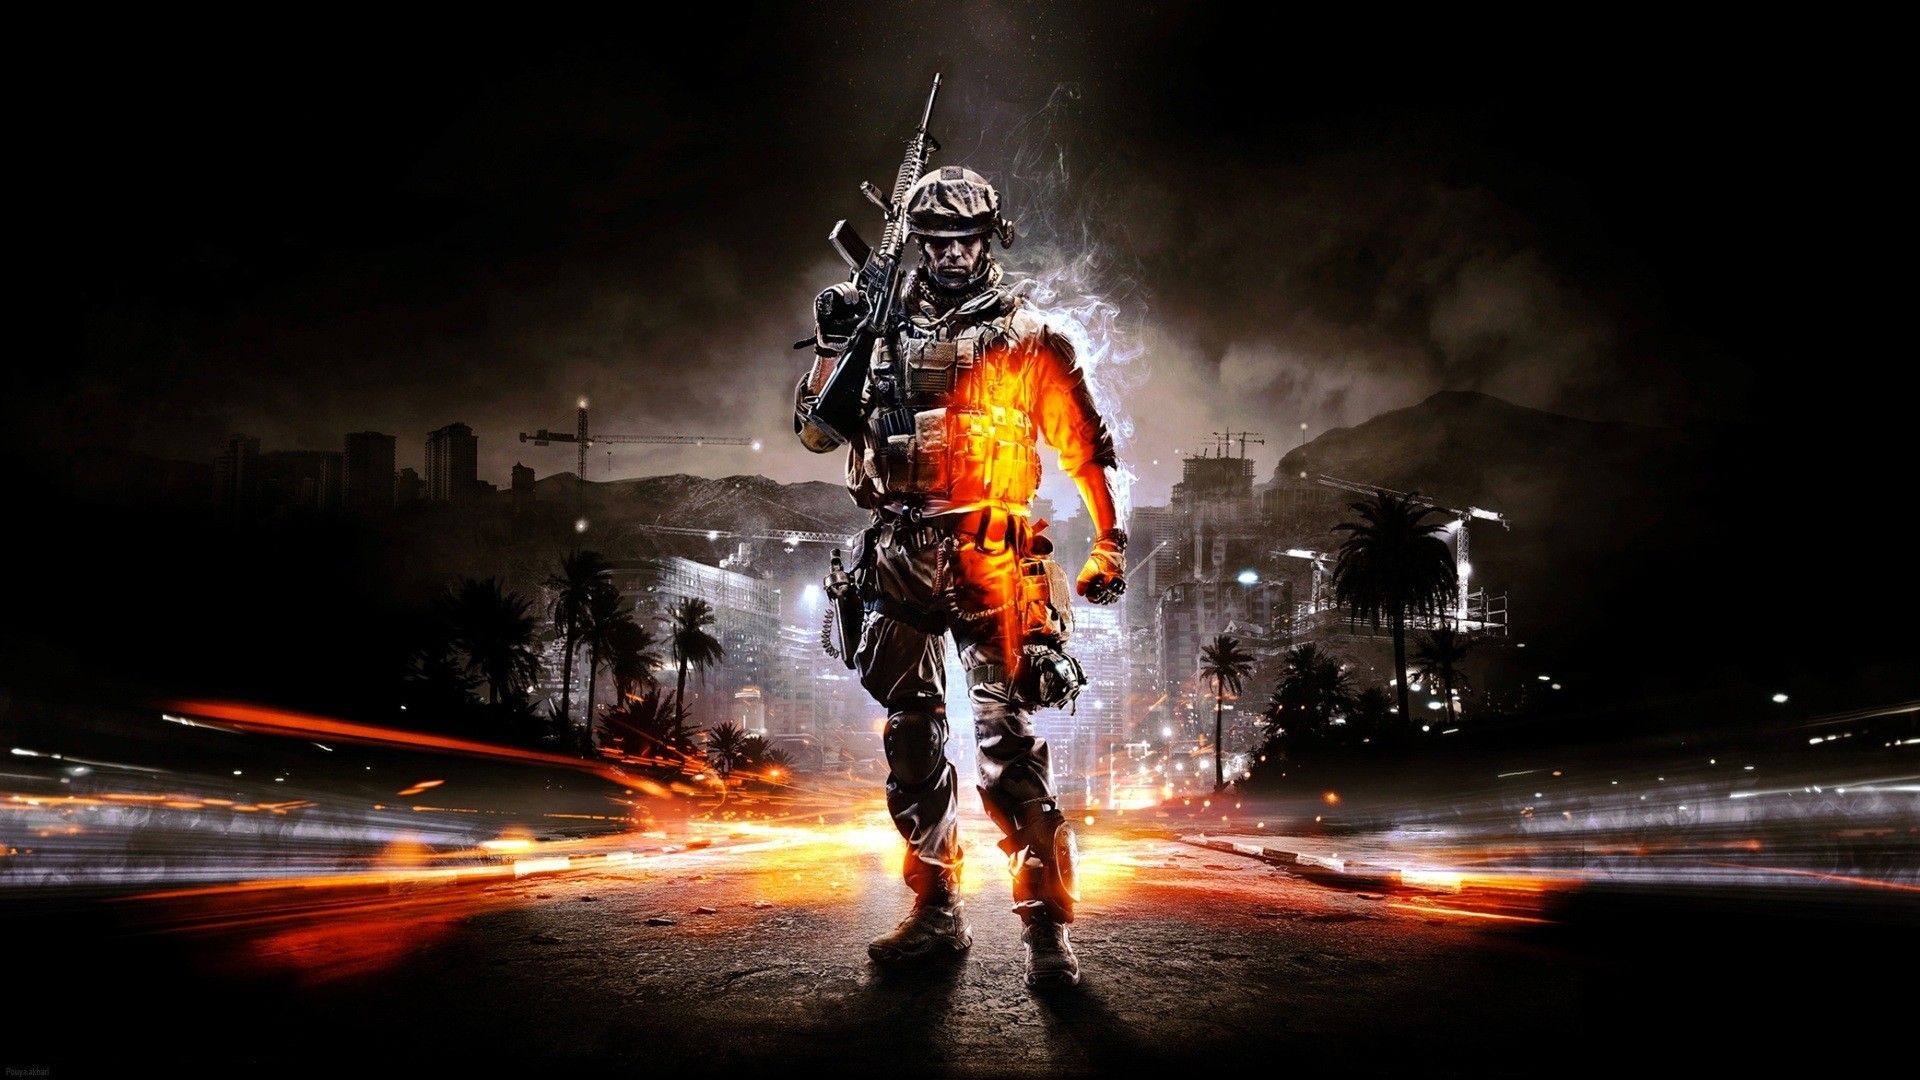 soldiers, video games, cityscapes, back, smoke, destruction